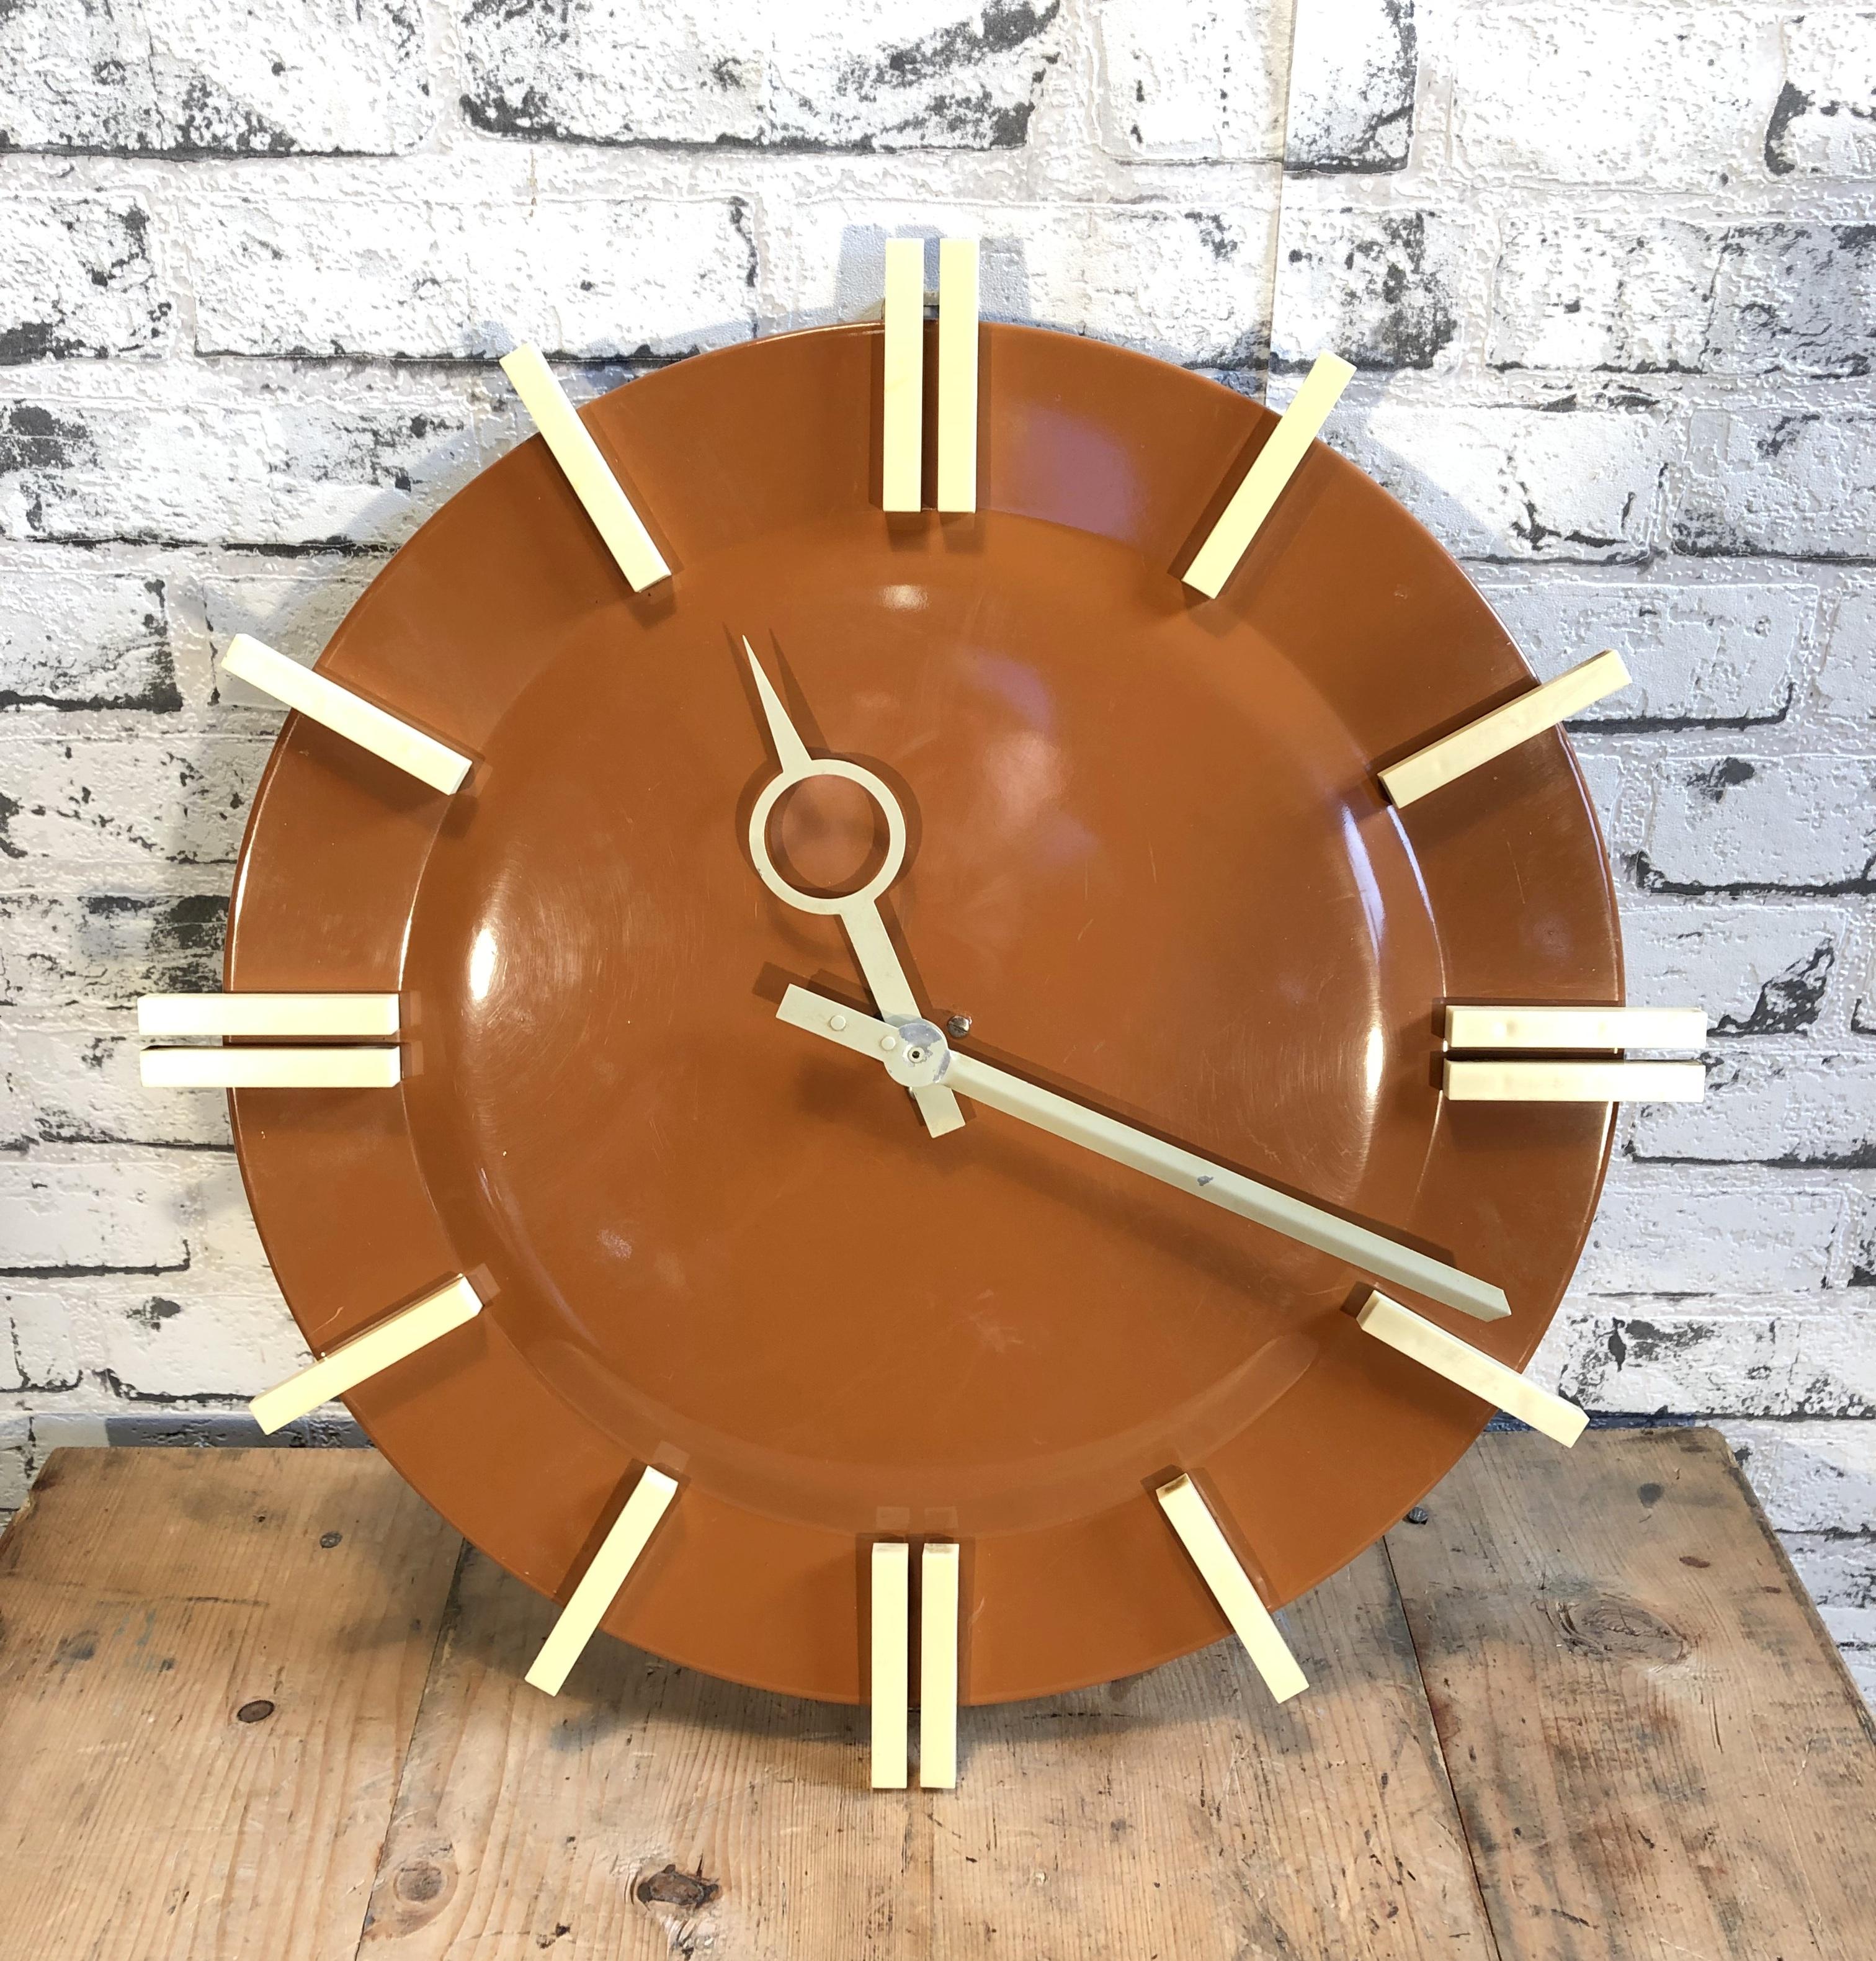 Pragotron PPH 413 is a type of indoor secondary clock. Was produced during the 1970s in former Czechoslovakia. Clock face with white plastic numerals is made from aluminum and has brown color. Diameter is 43 cm. The piece has been converted into a